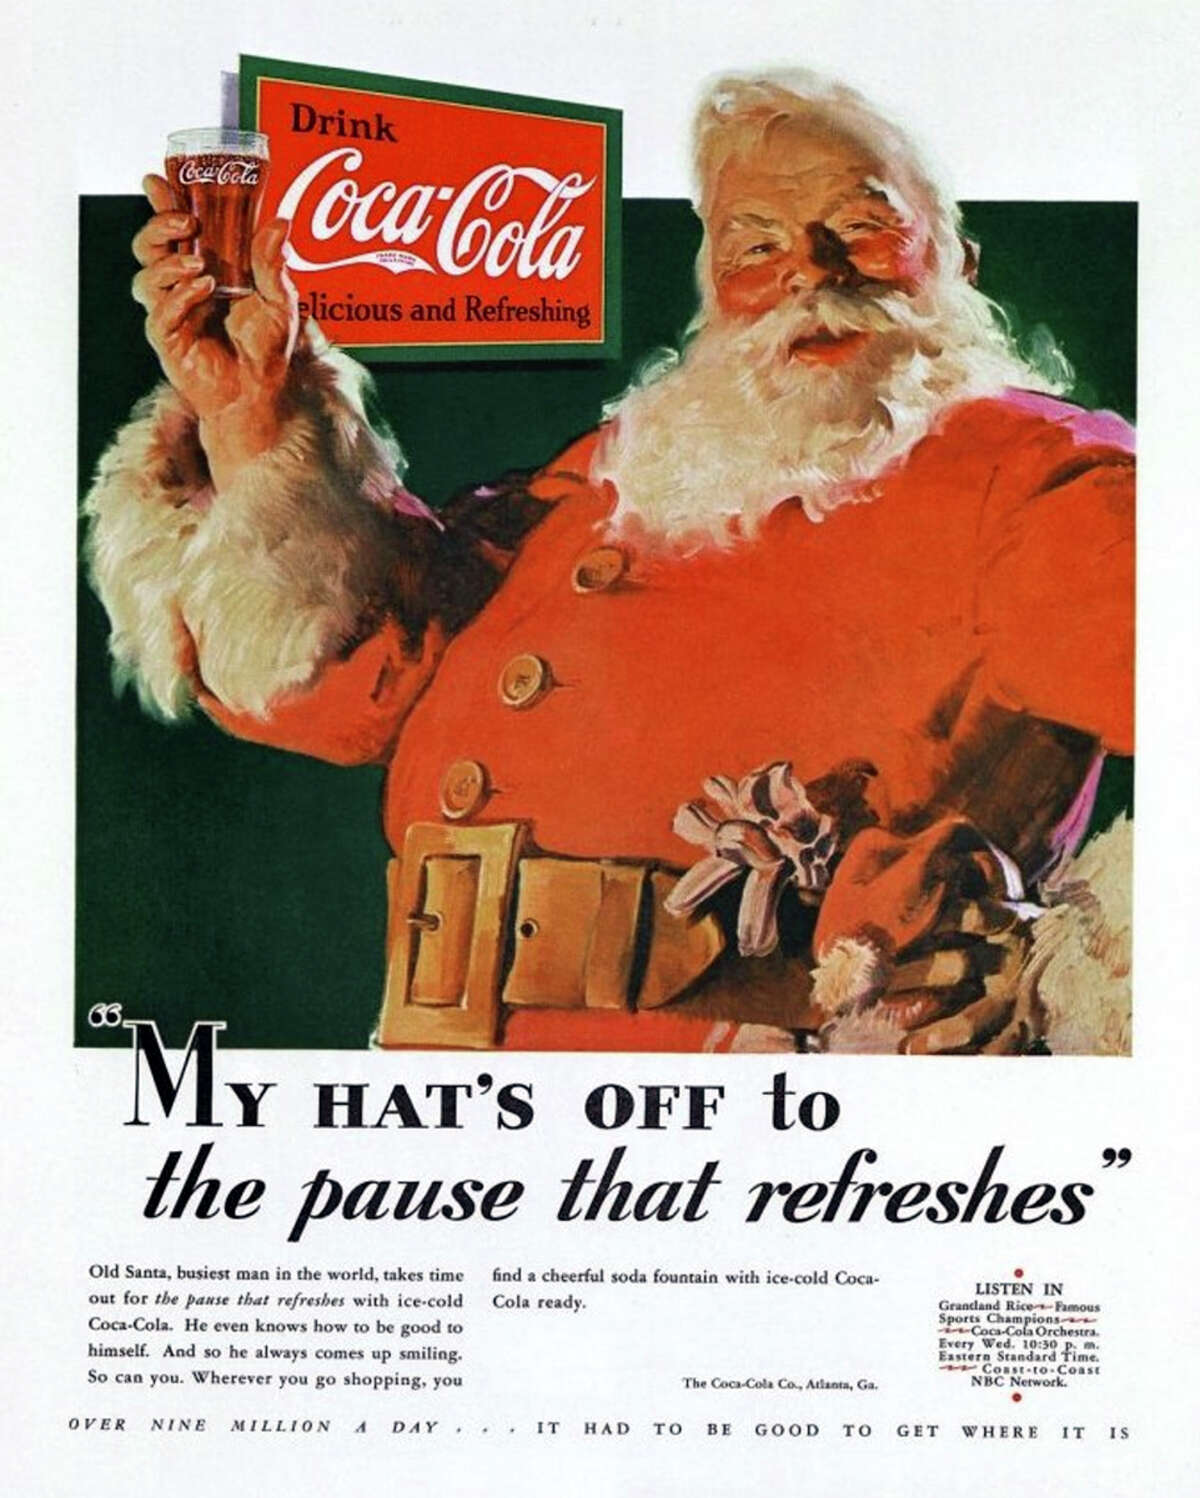 The Coca-Cola company’s website claims to have invented him in the 1930s as part of an advertising campaign, but the real roots are to be found during the Civil War. 